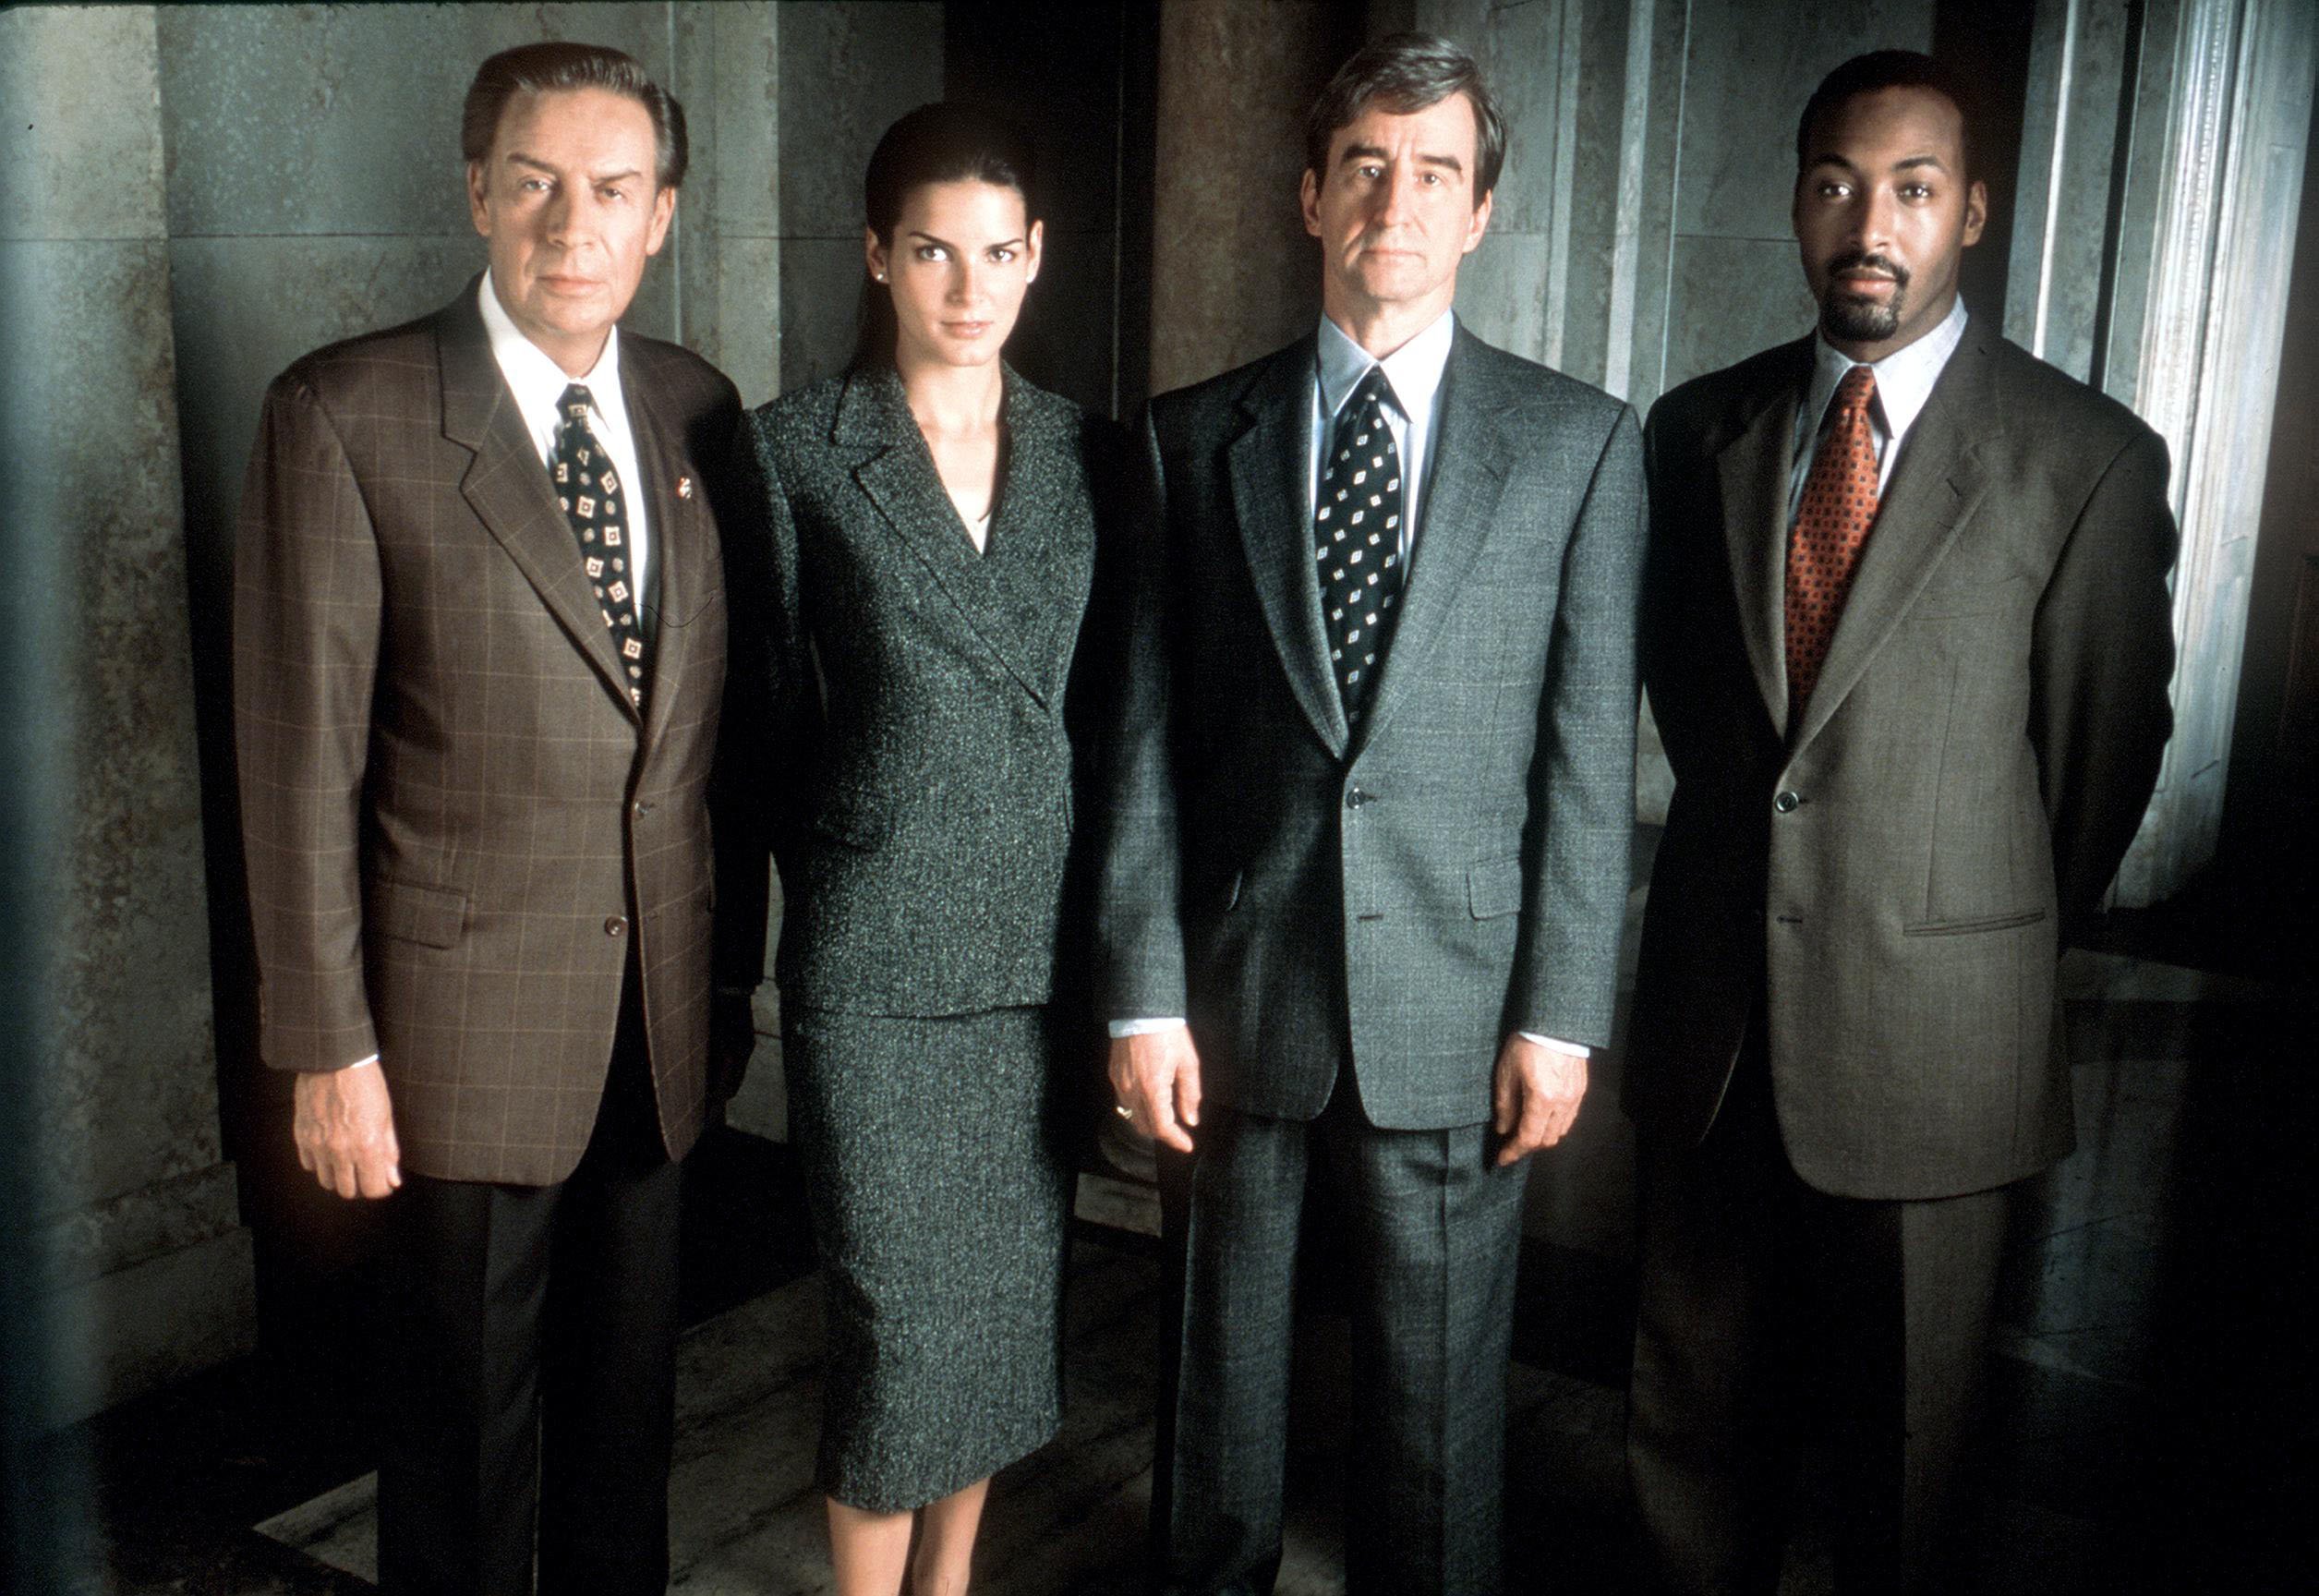 The 1999 cast of 'Law & Order'